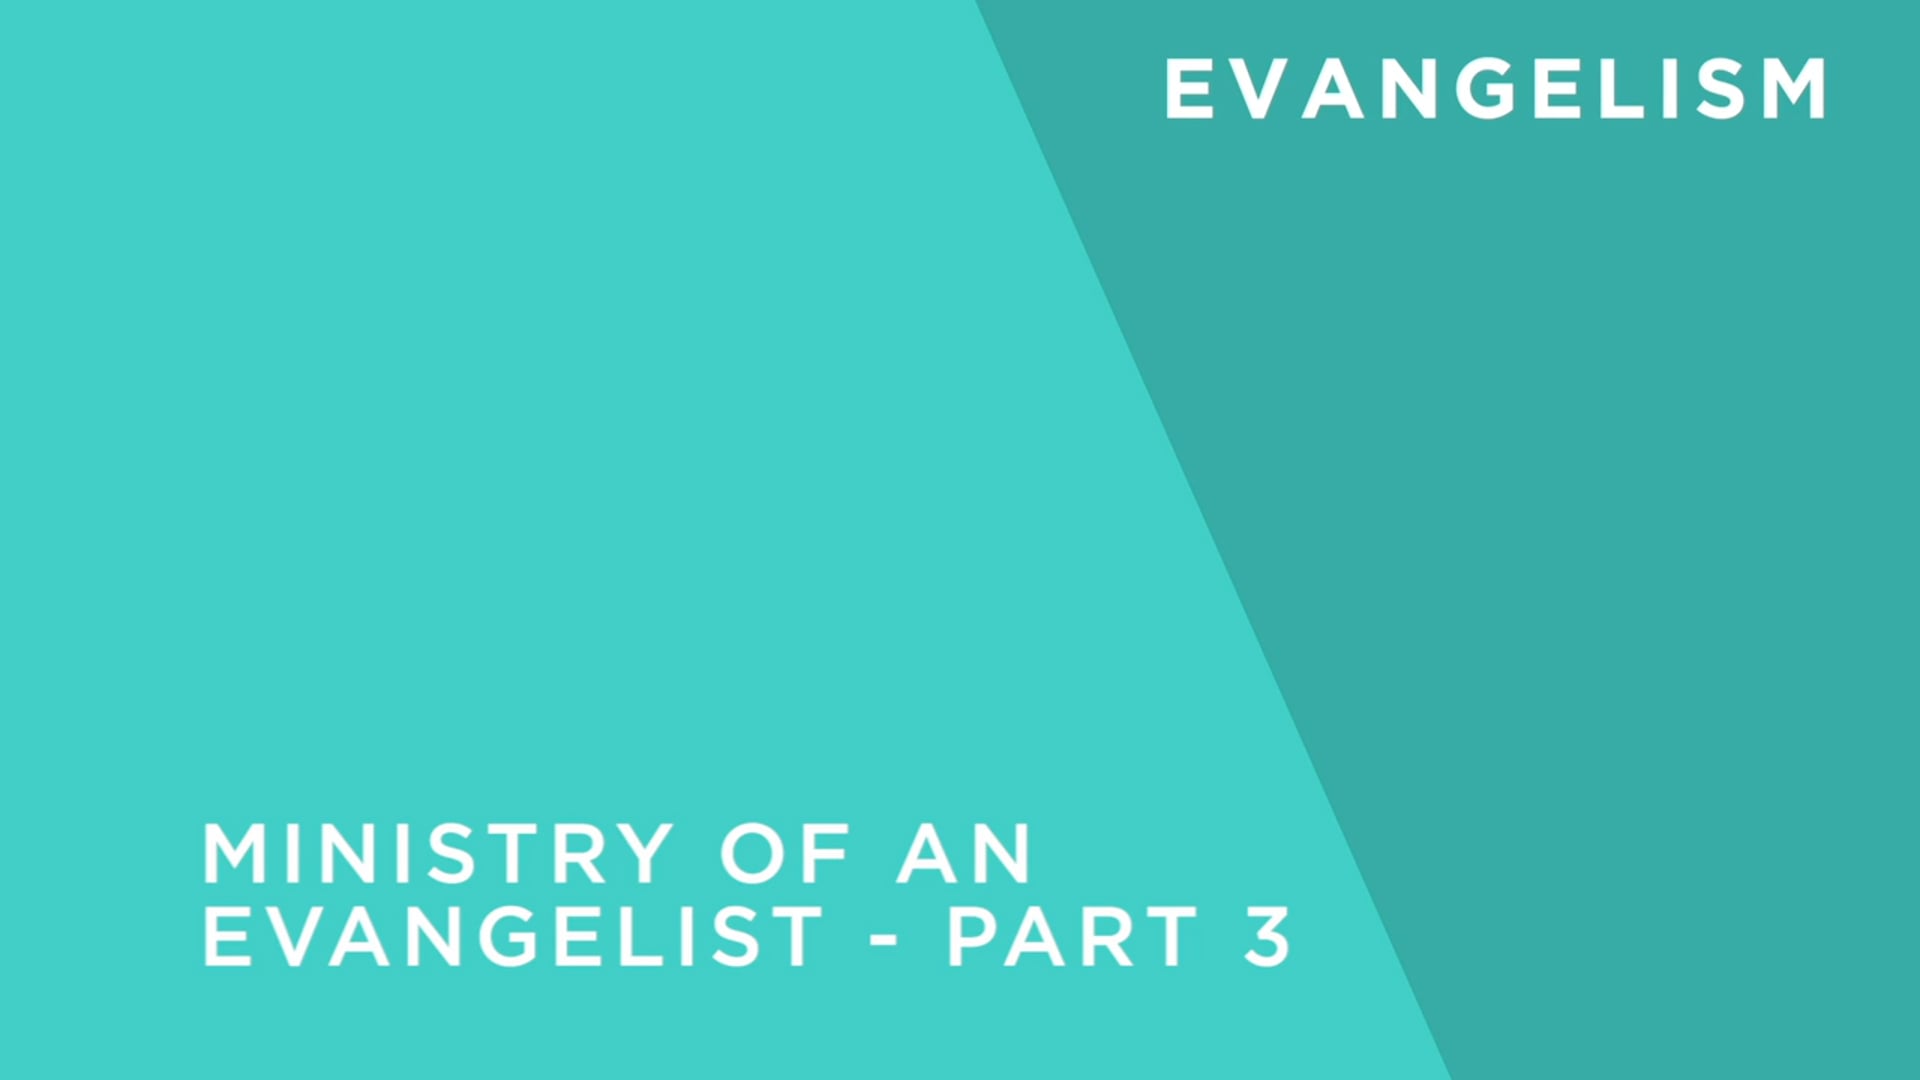 The Ministry of an Evangelist Part 3